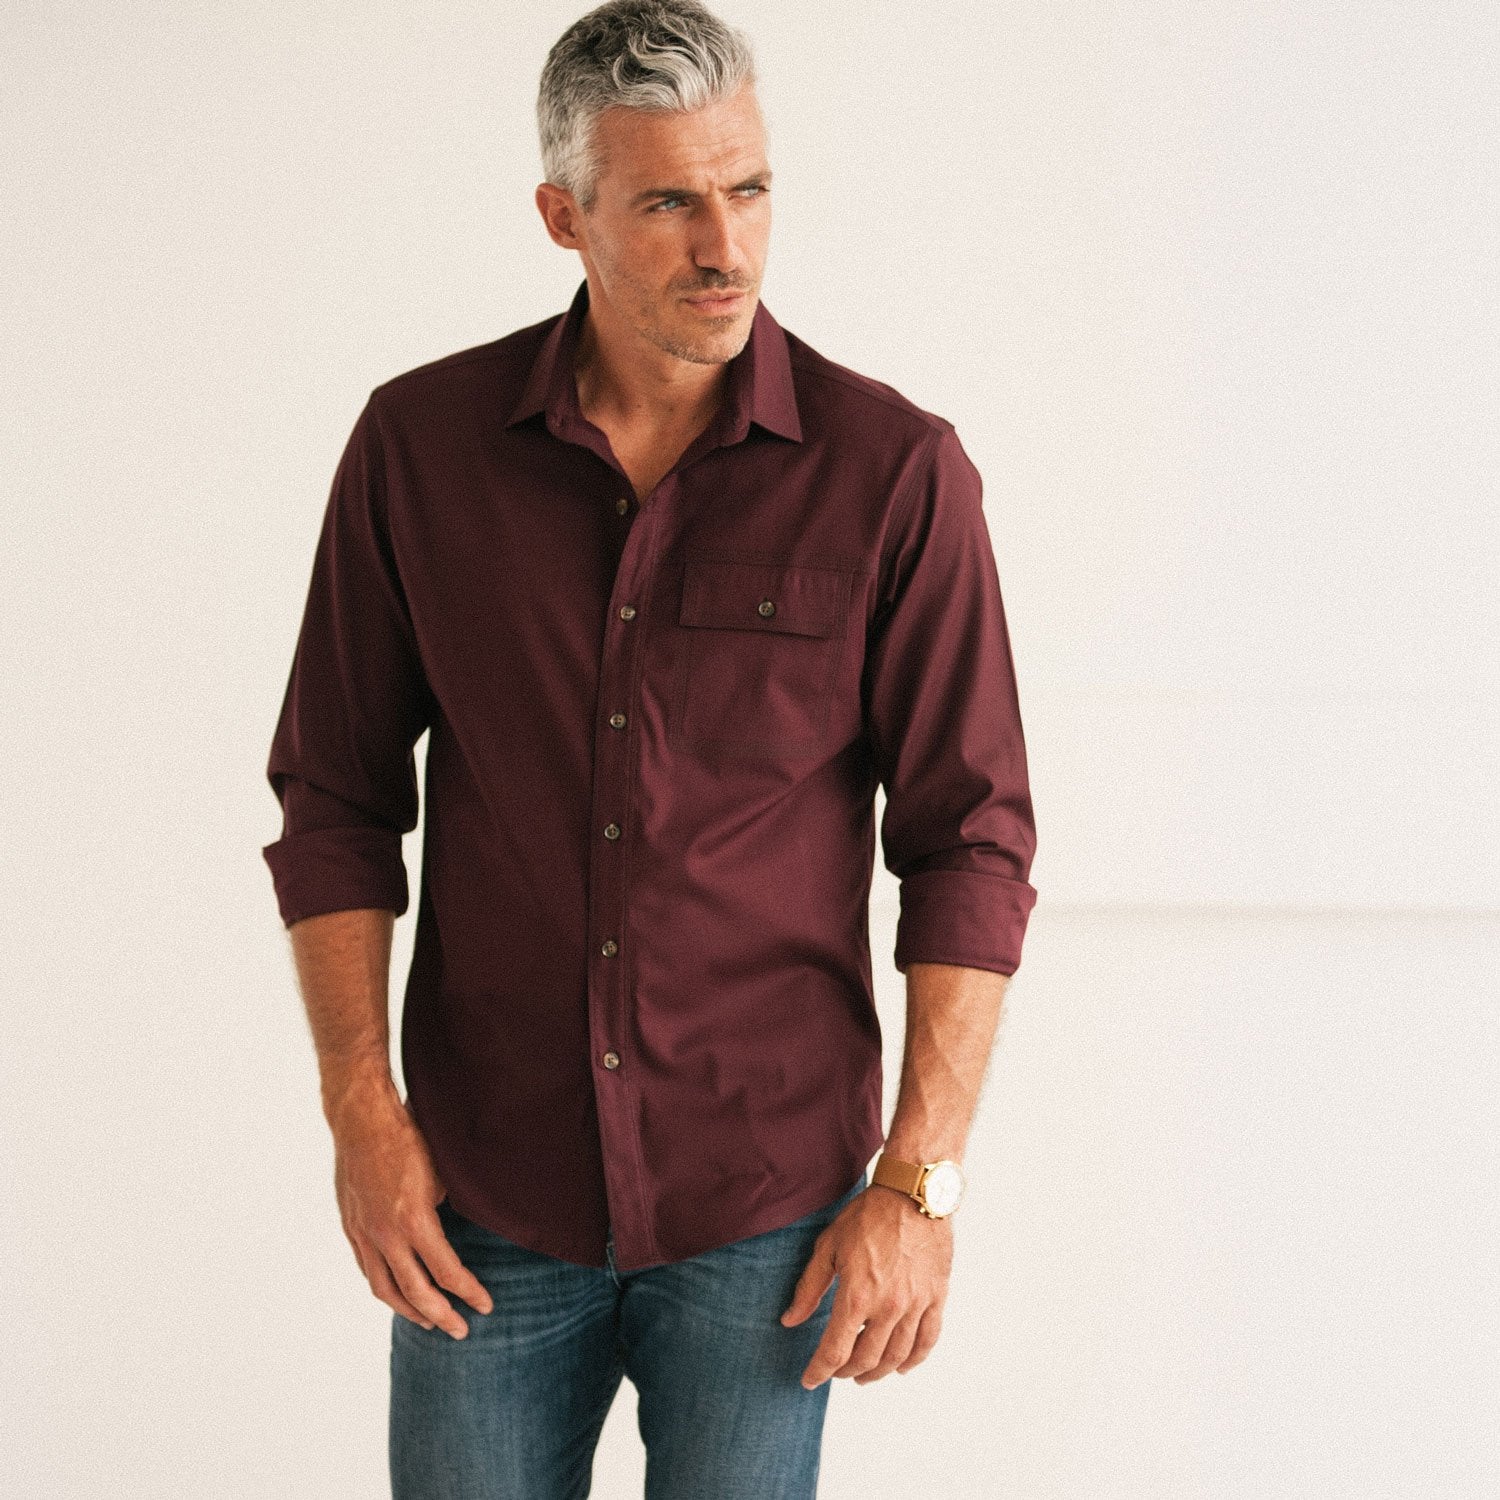 Men's Casual Shirt Buttons Pulling Versus Correct Fit